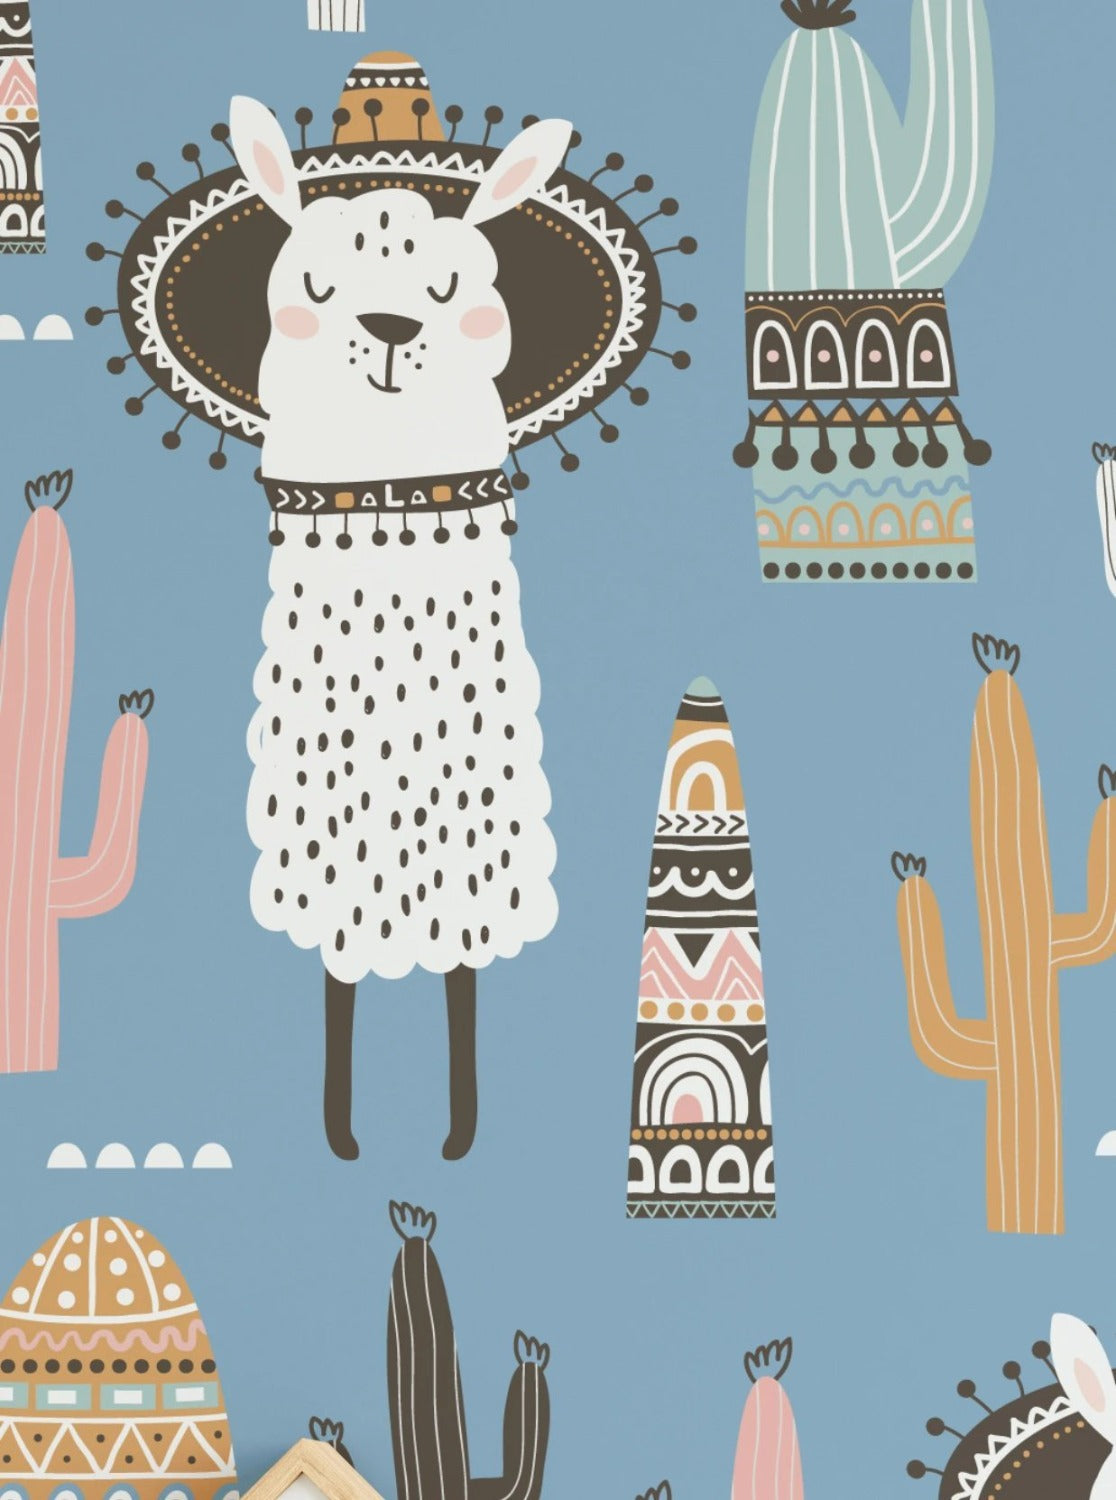 Whimsical llama illustration in festive attire on light blue background with cacti and tribal motifs.